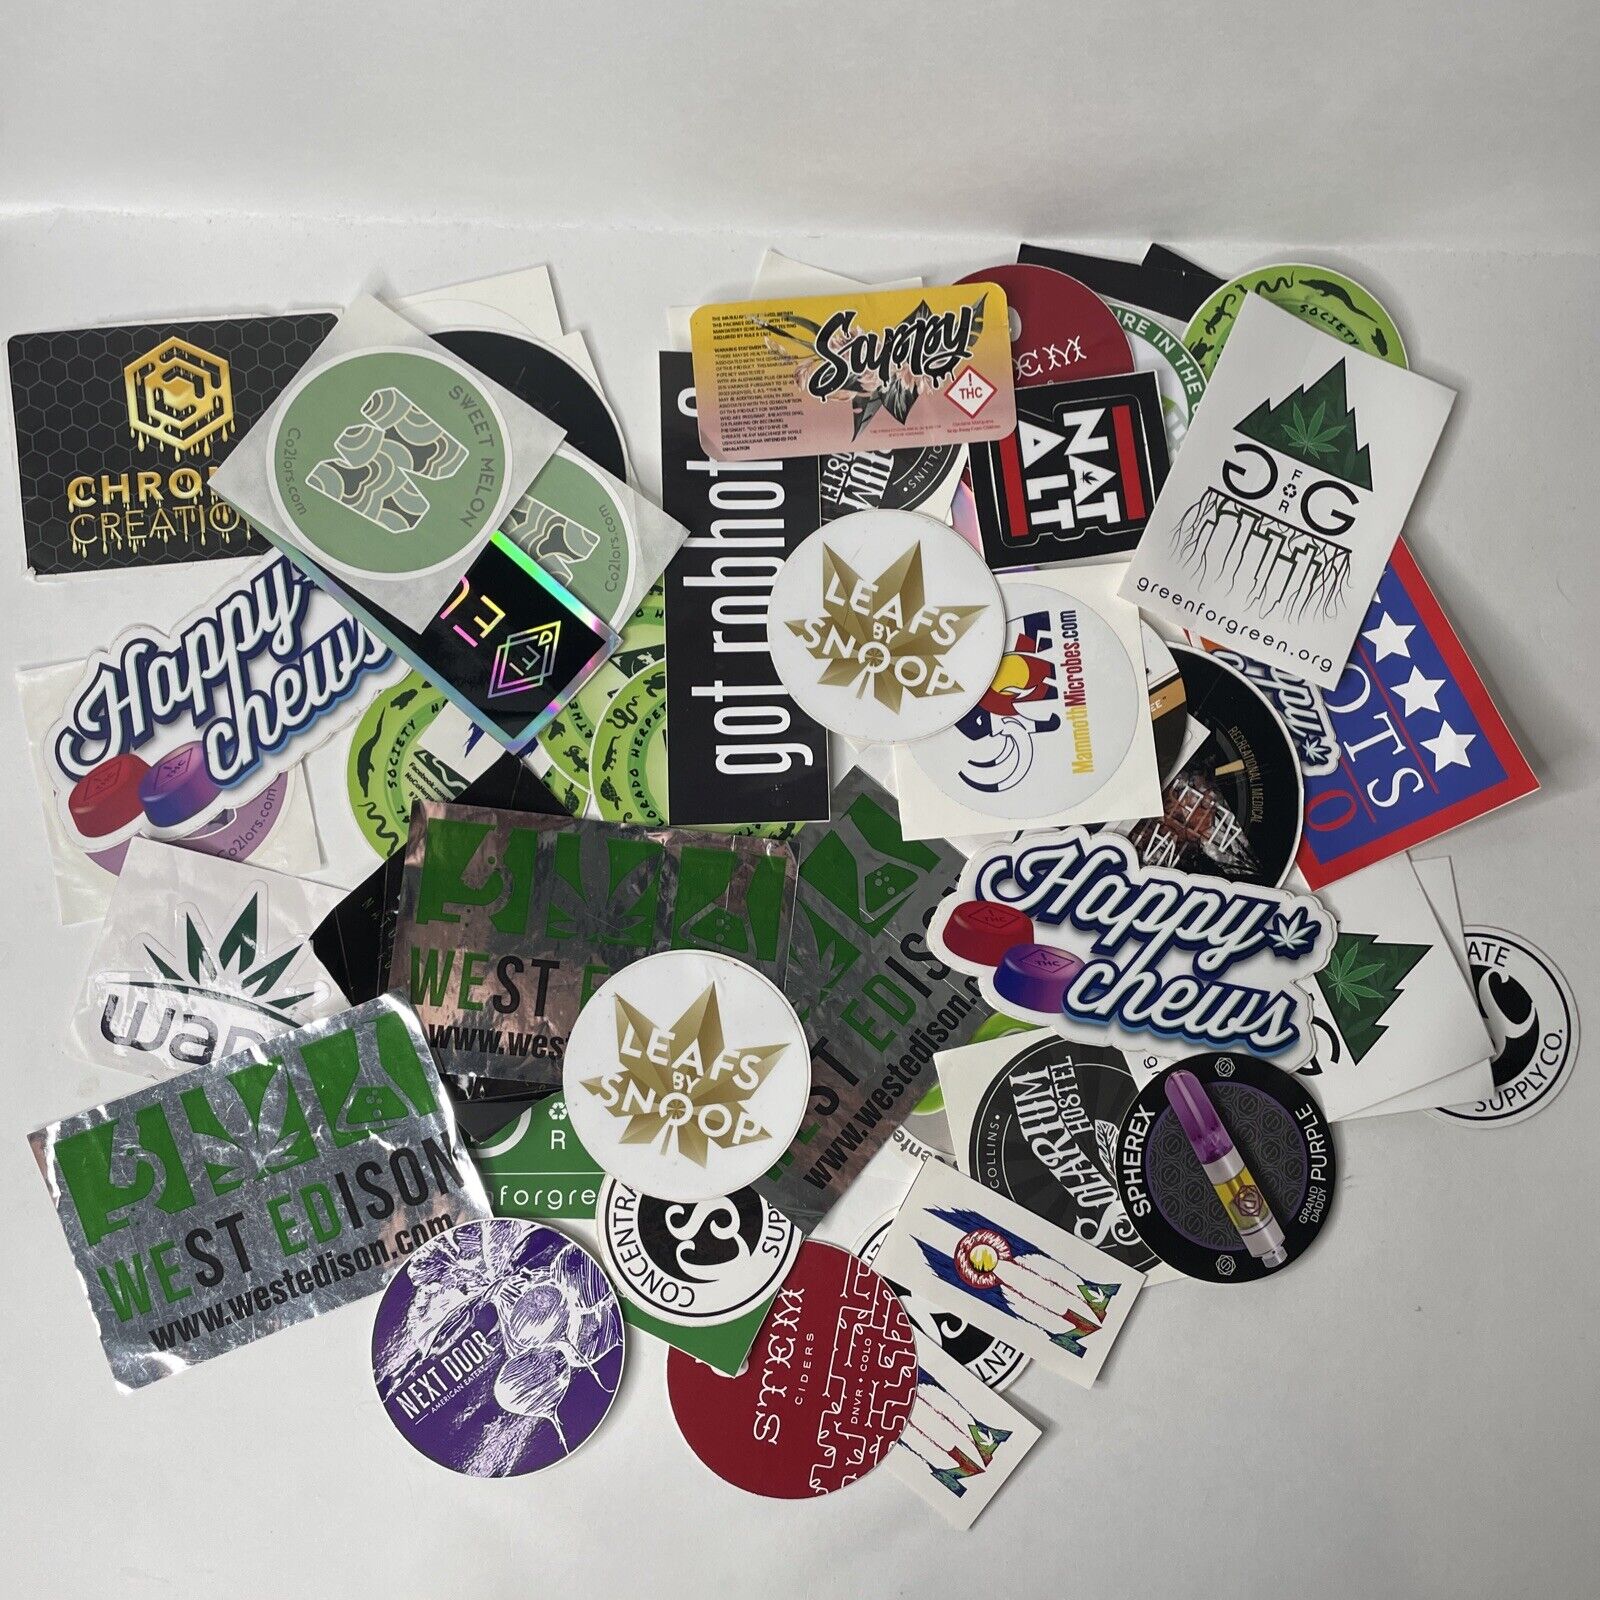 Huge Colorado Dispensary Sticker Lot 4/20 Weed Pot Leafs By Snoop + More💥🤘